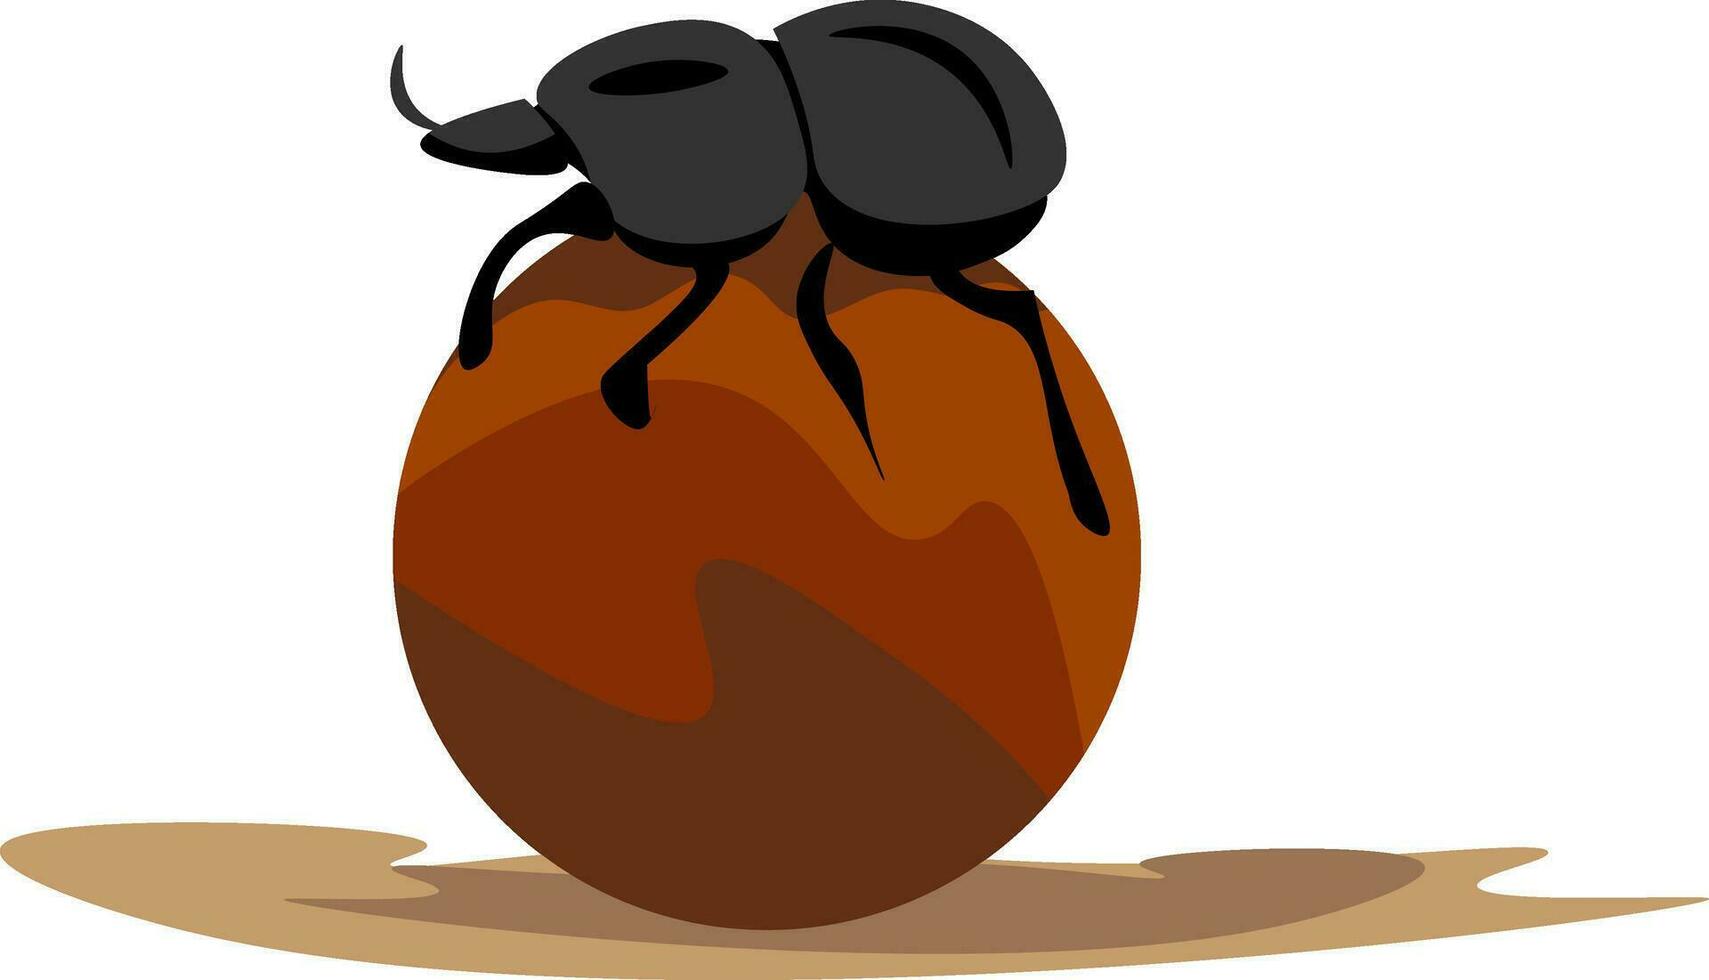 Image of dung beetle, vector or color illustration.